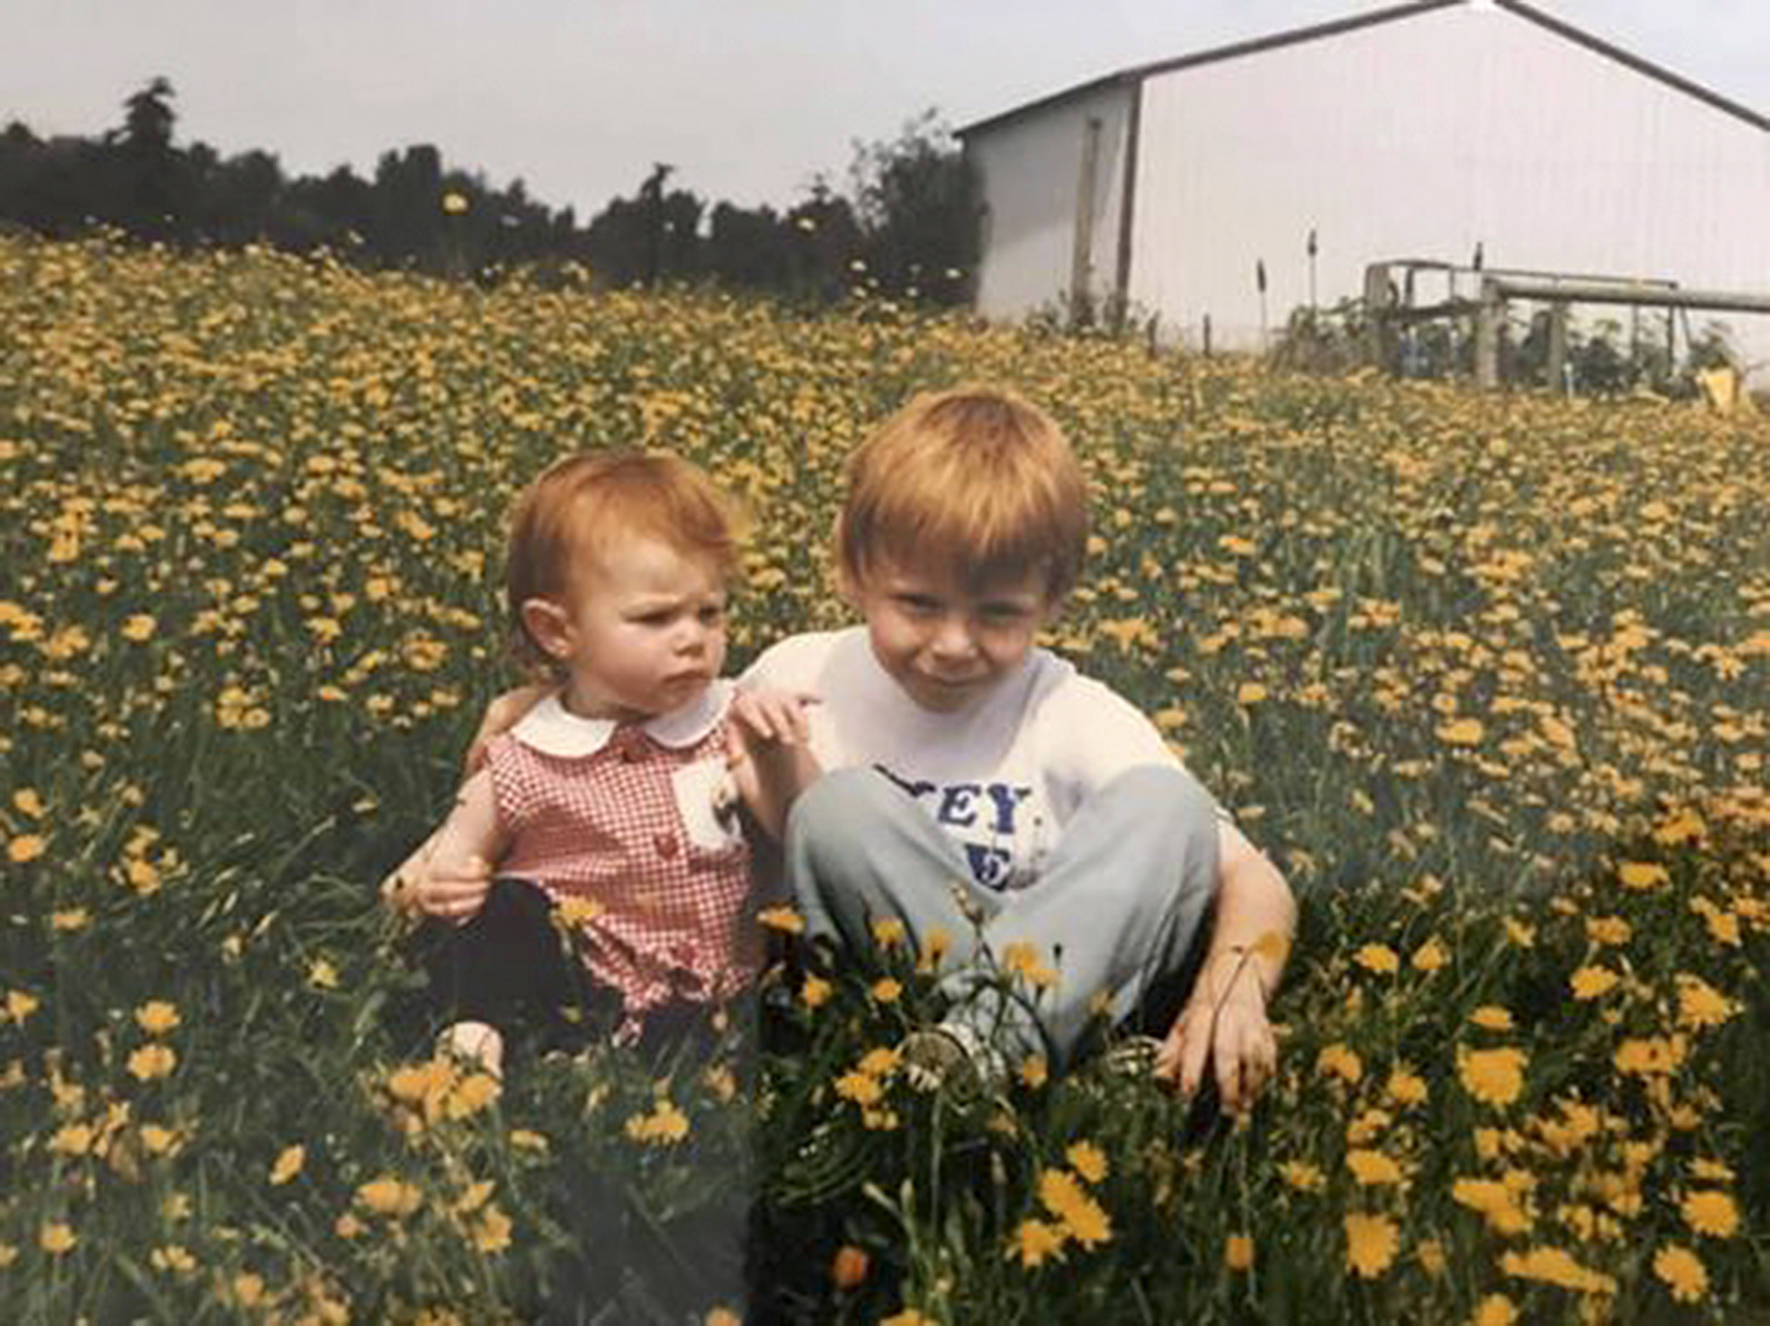 Photo courtesy of Rylee Russell Mark’s family. Rylee and his little sister Baylee when they were young. Friends say Baylee was the “light of his life” as they grew up together in Whatcom county and later Renton.